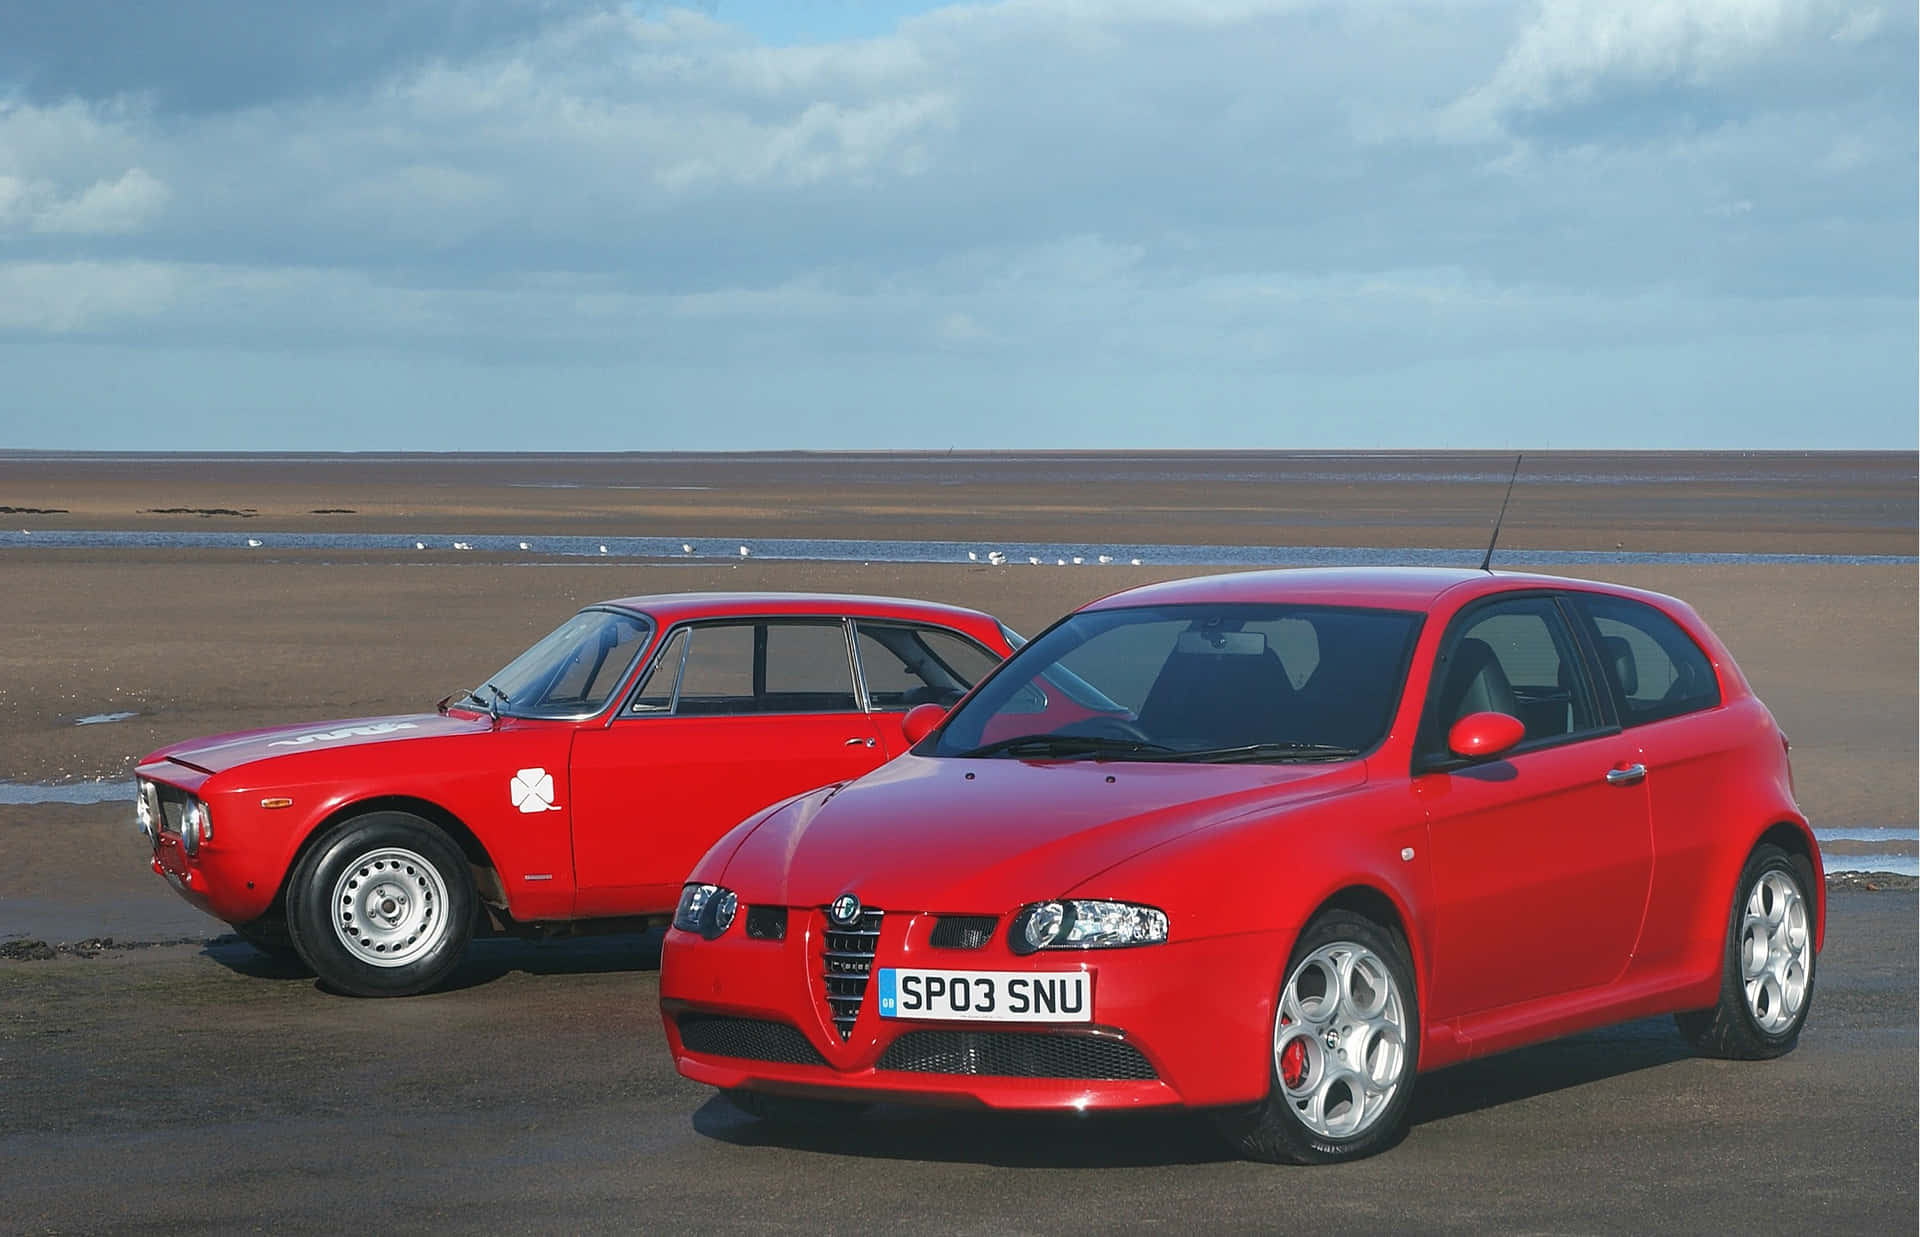 Alfa Romeo 147 - A shining example of style and performance Wallpaper